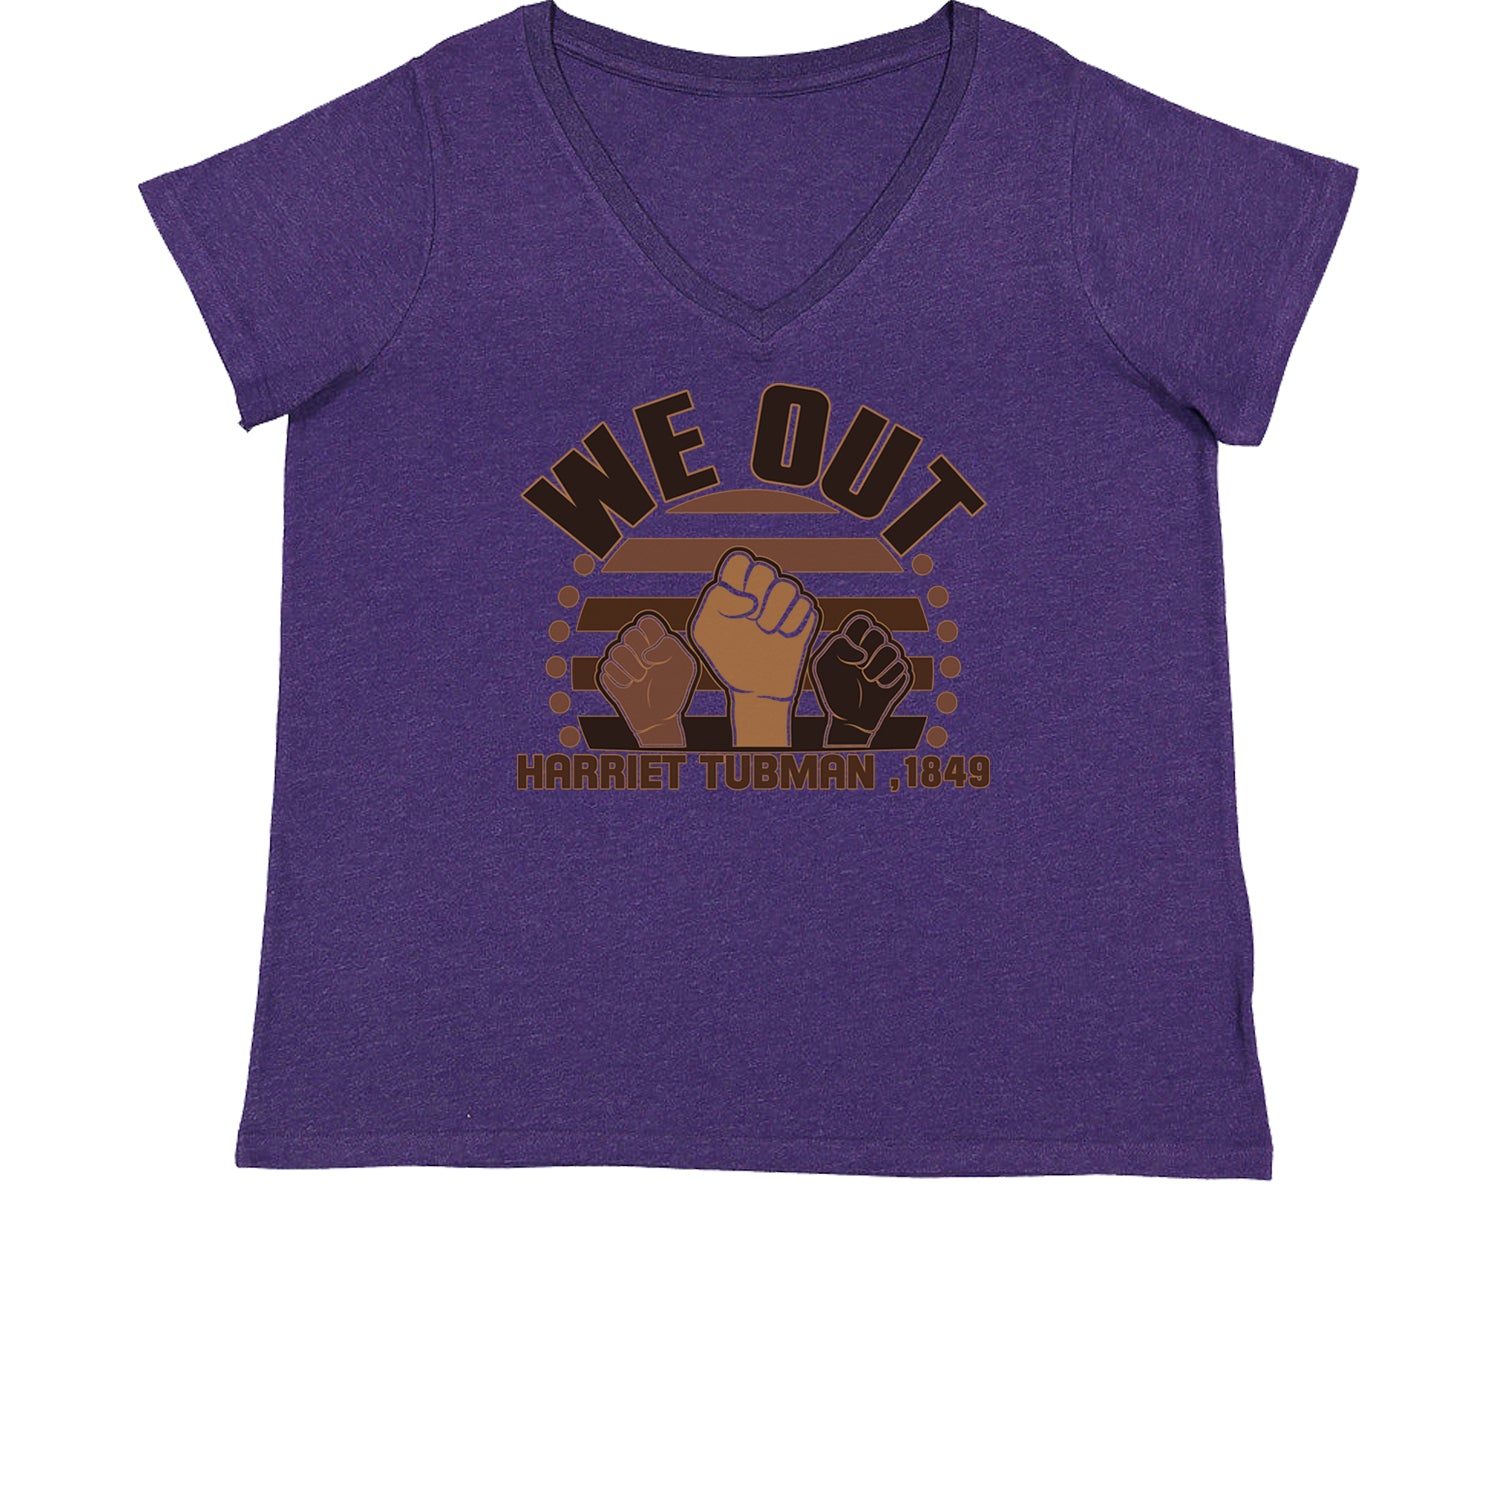 We Out Harriet Tubman Raised Fists BLM Womens Plus Size V-Neck T-shirt african, american, black, blm, harriet, harriett, lives, matter, out, shirt, tubman, we by Expression Tees